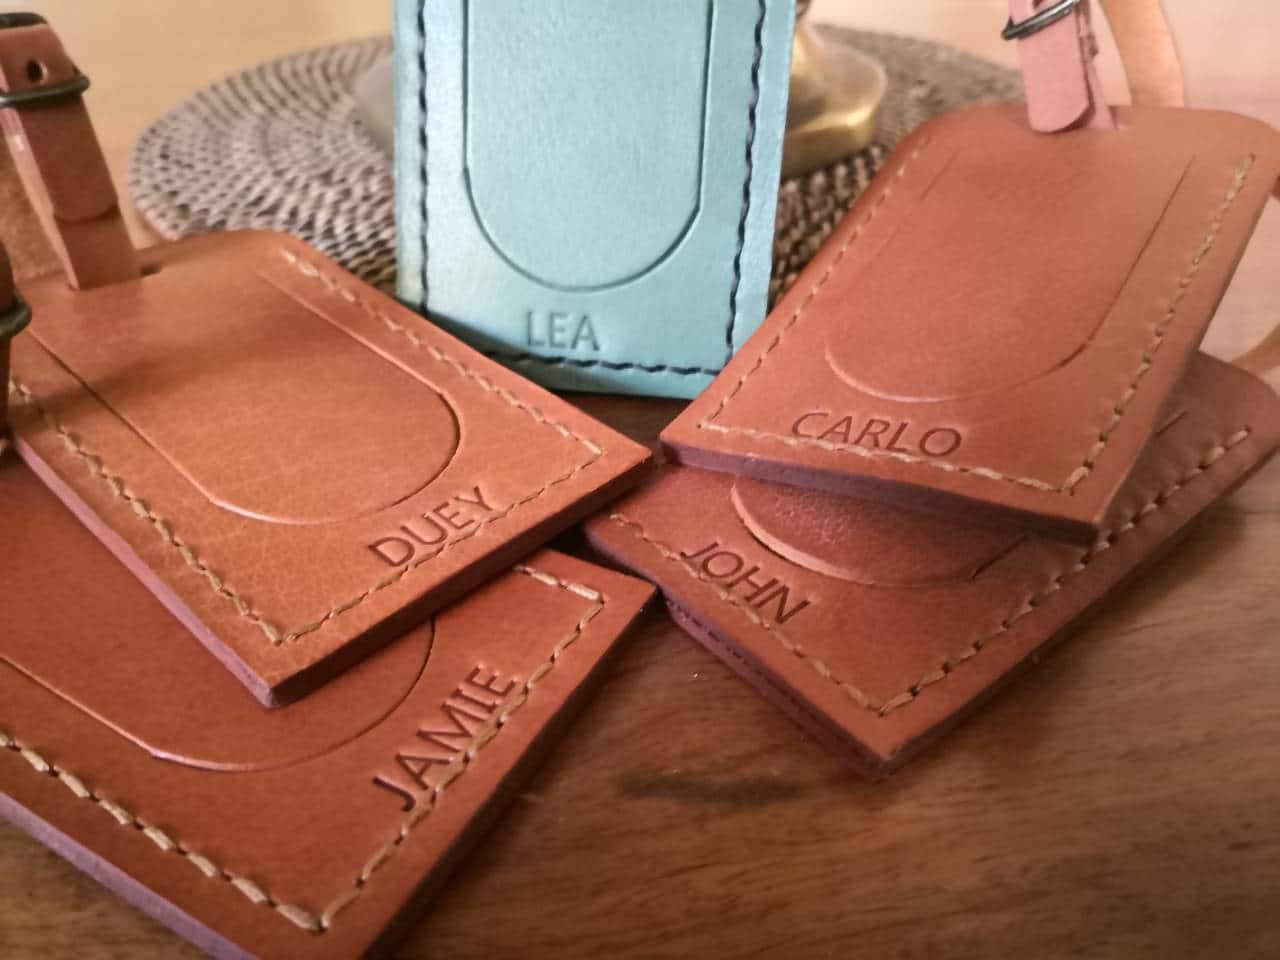 leather luggage tag